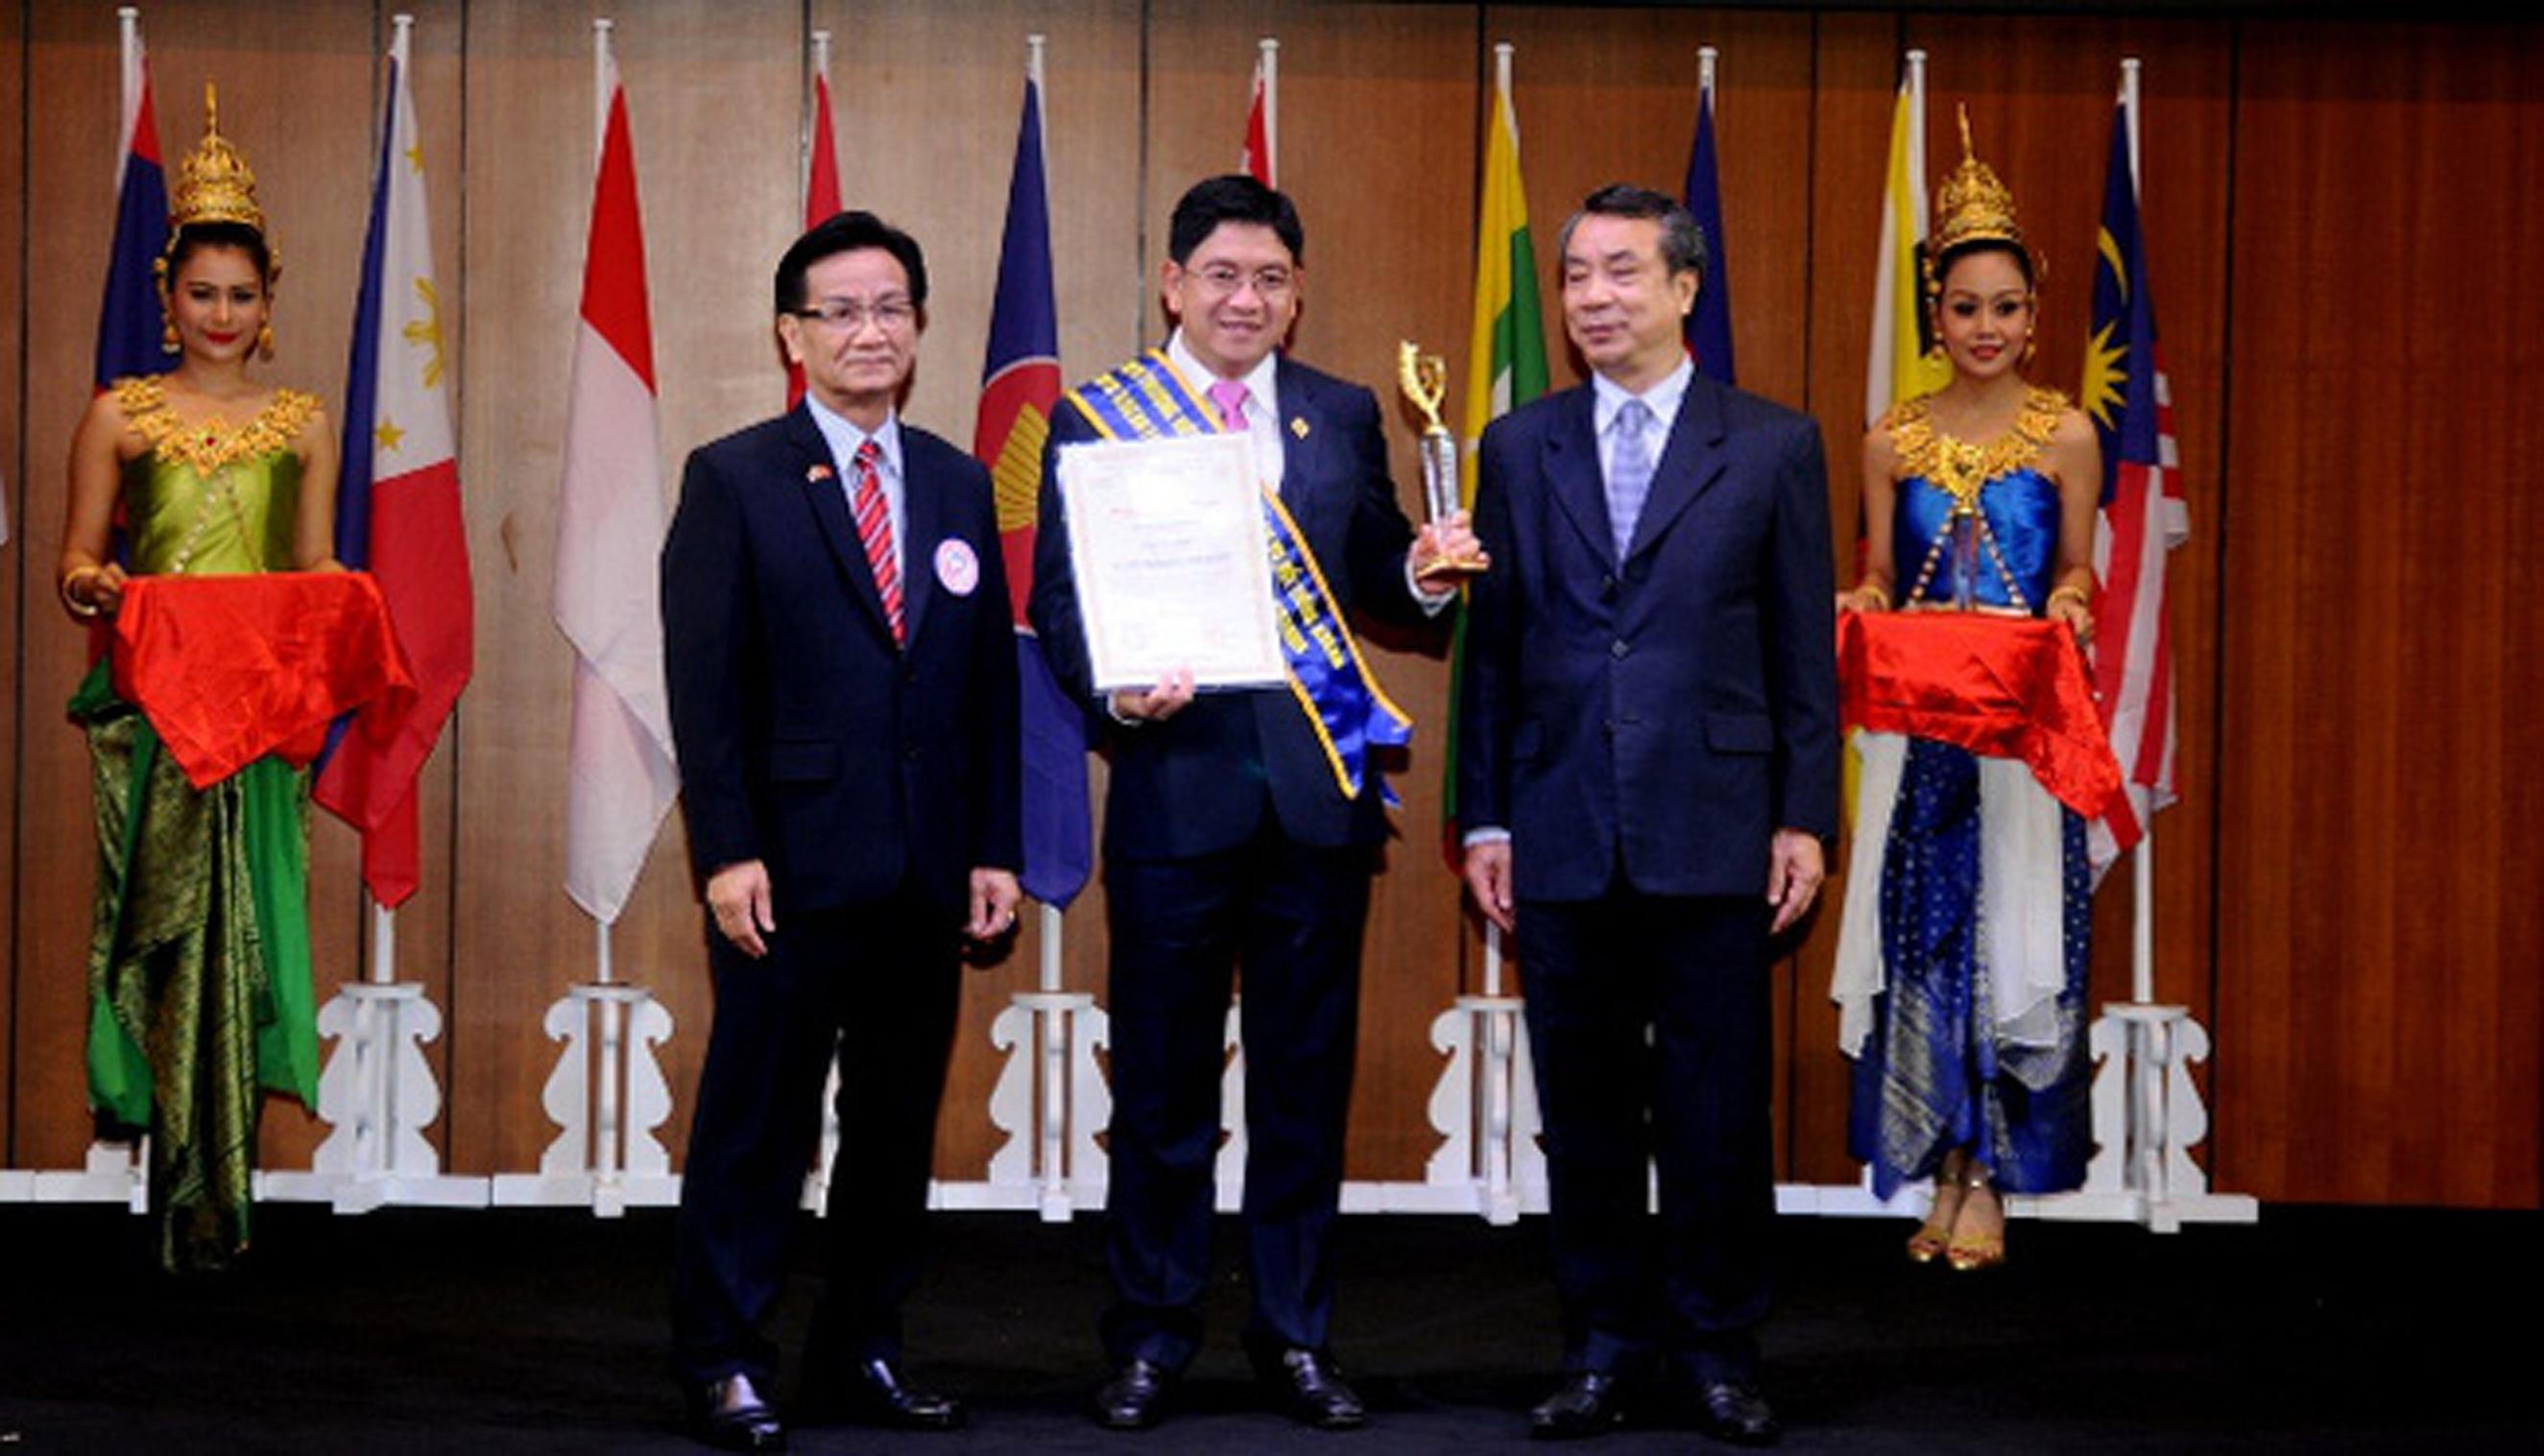 Sacombank is in the top 10 famous ASEAN brands